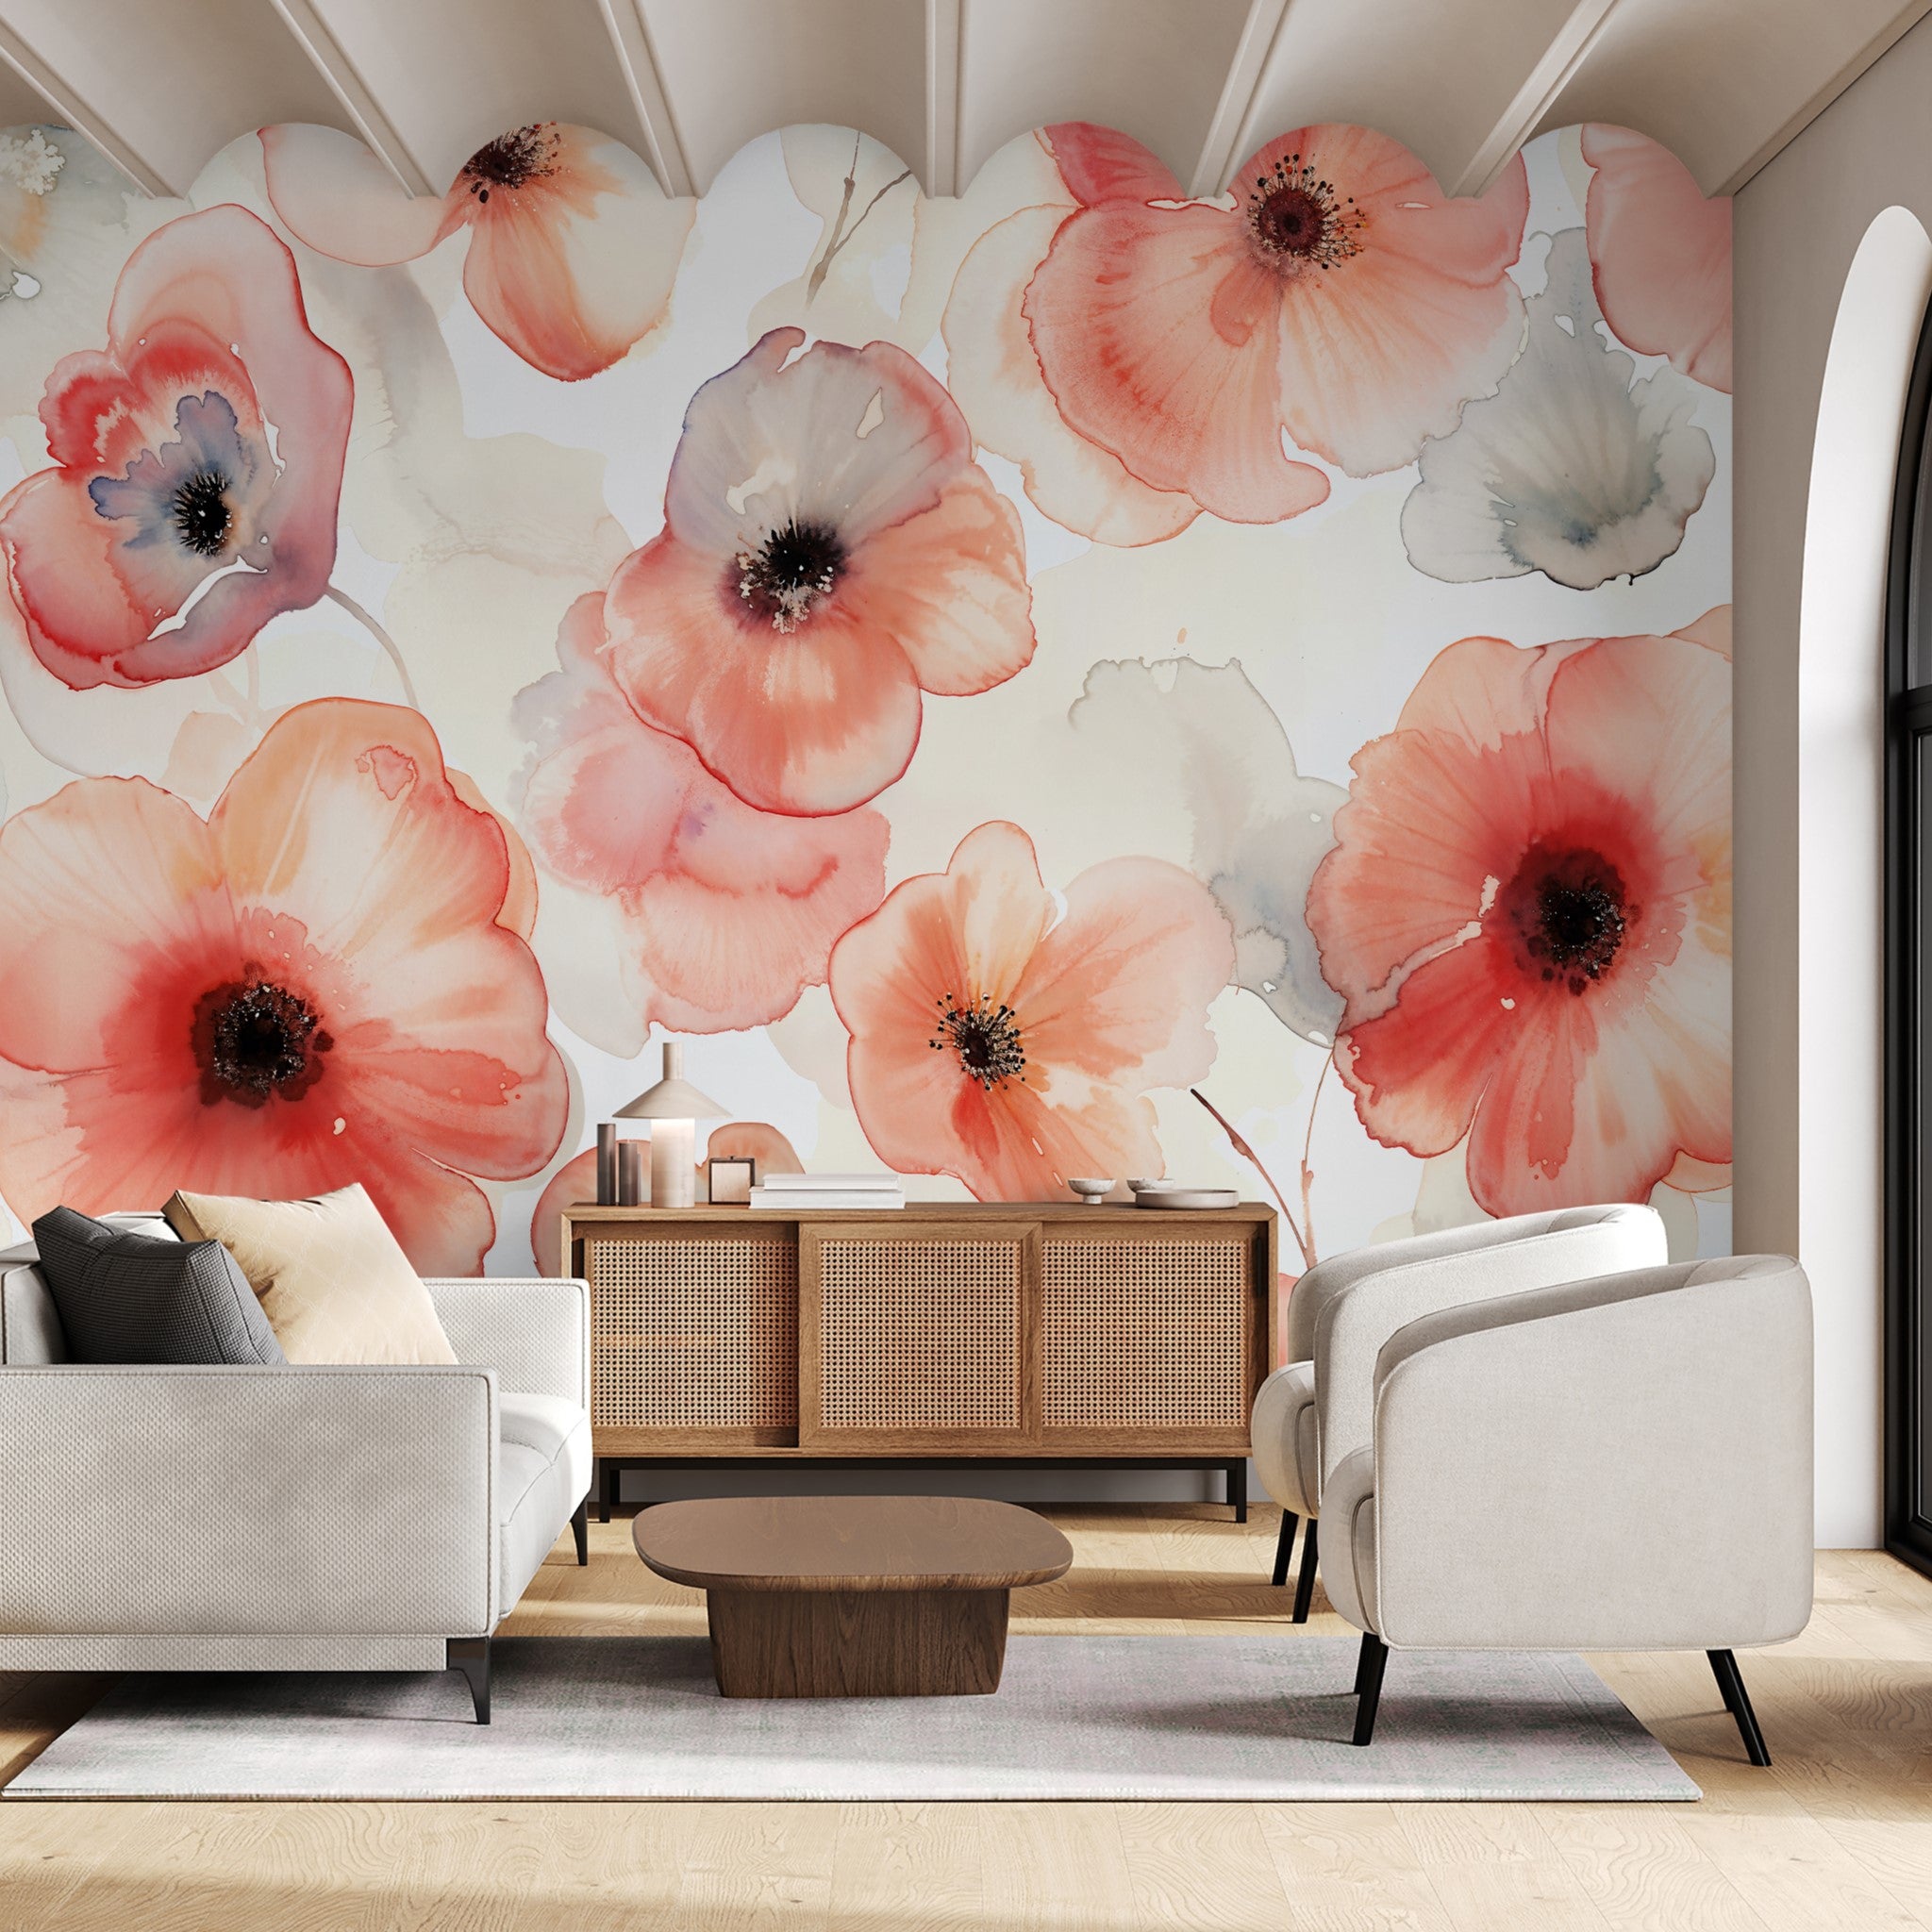 "Wall Blush's Poppies in Bloom Wallpaper enhancing modern living room decor with vibrant floral design."